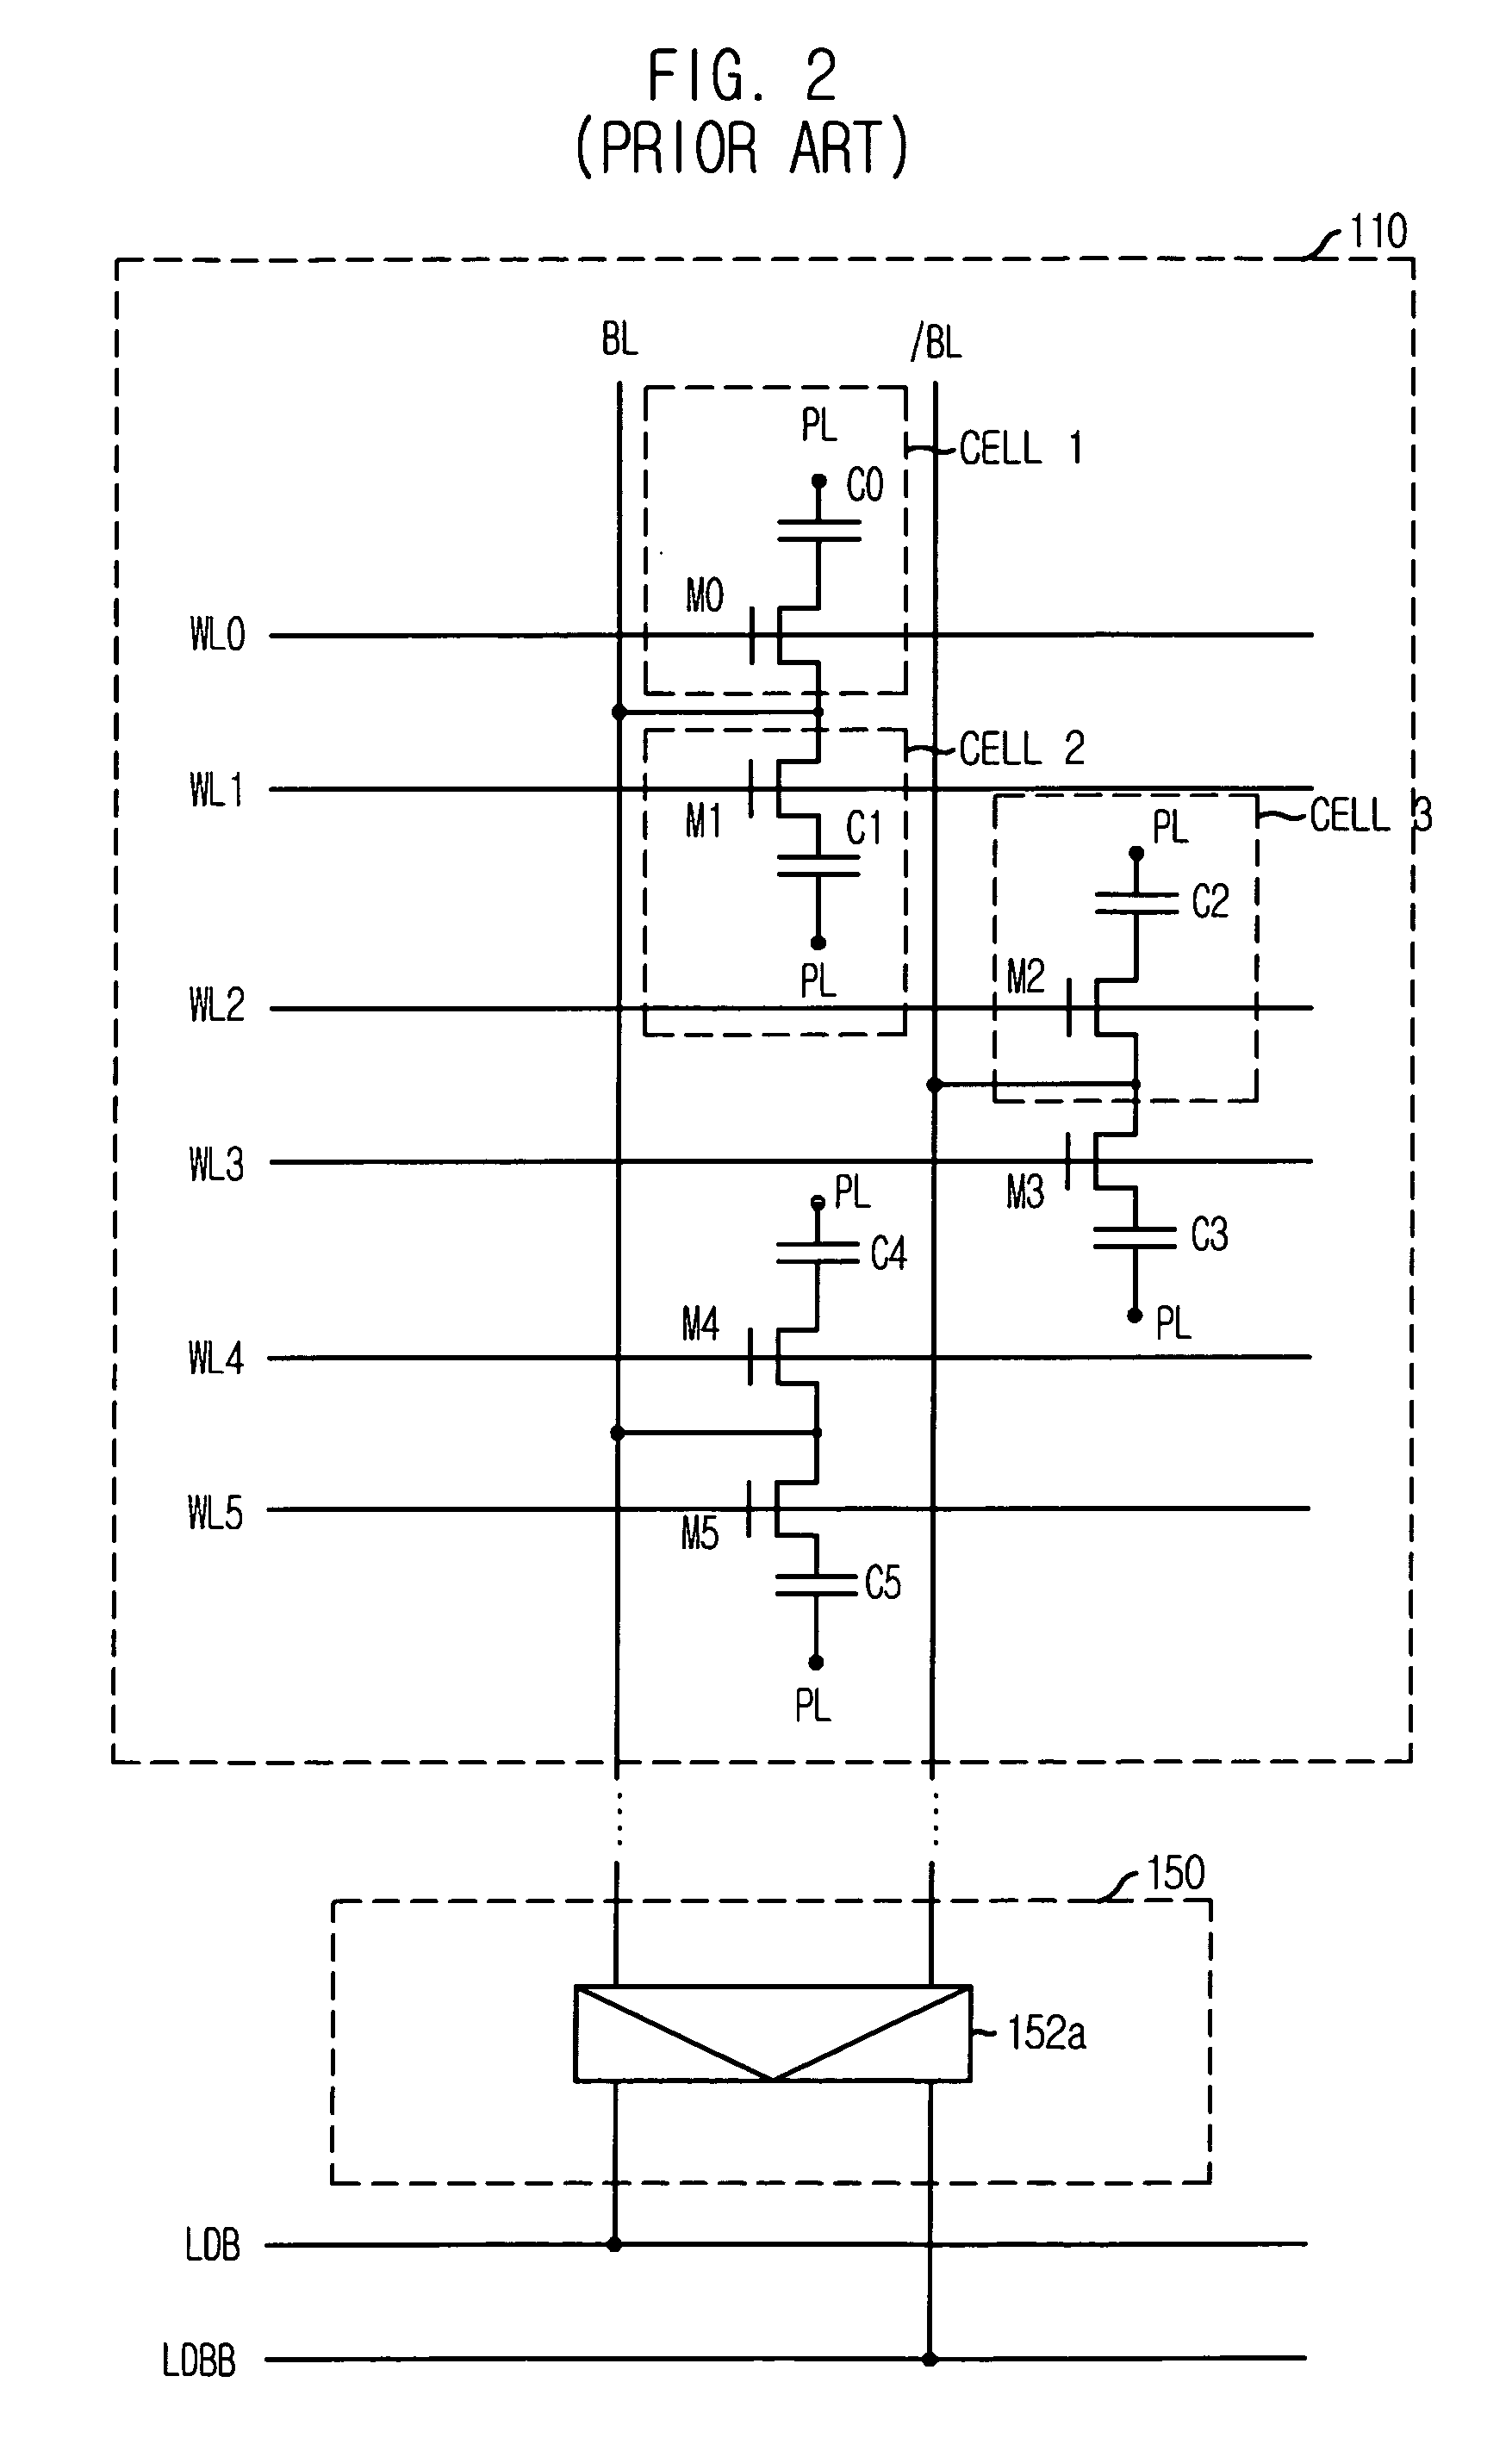 Semiconductor memory device for a low voltage operation